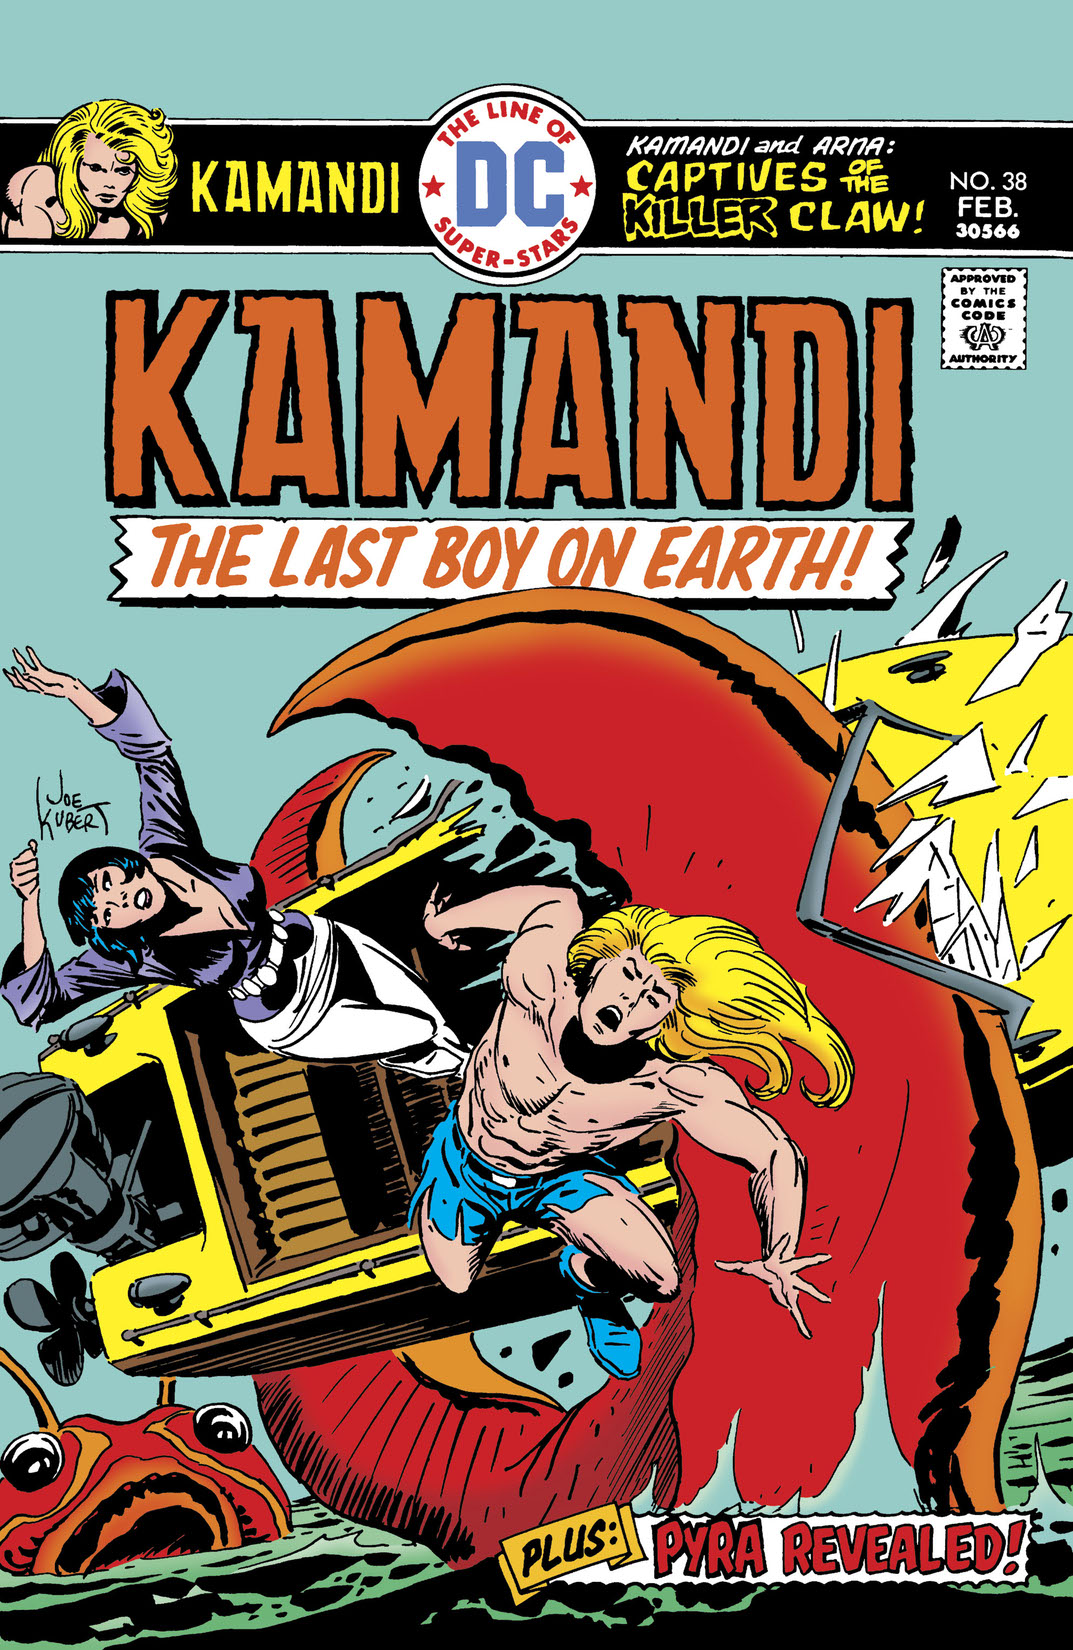 Kamandi: The Last Boy on Earth #38 preview images